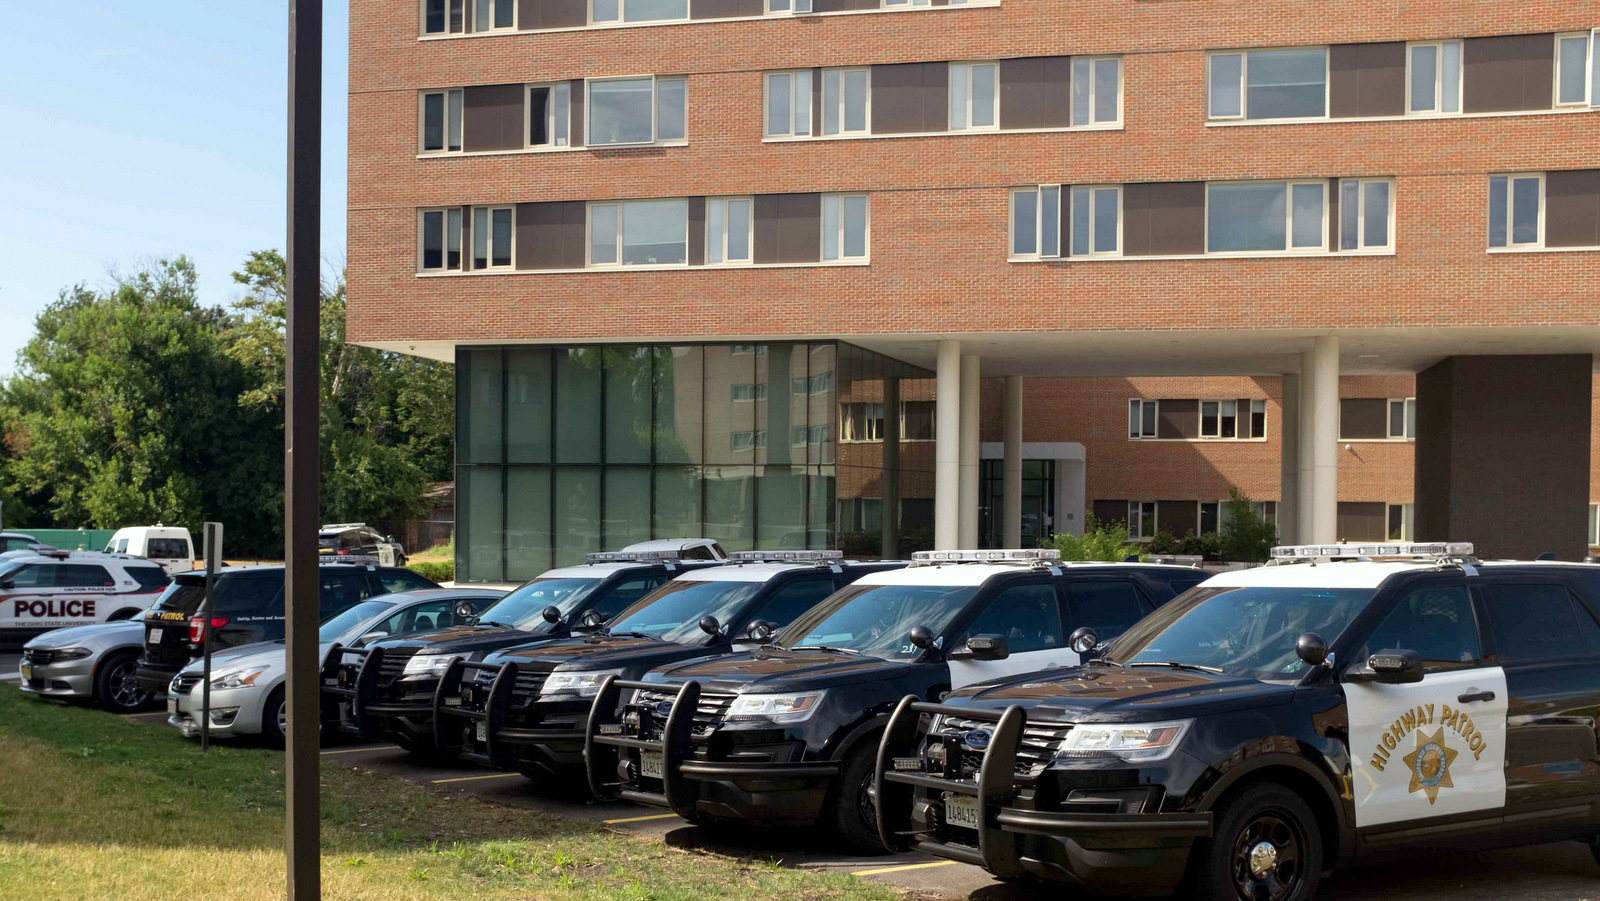 Police cruisers from across the country parked outside of a student resident hall at Case Western Reserve University in Cleveland, Ohio. Many of the dorms on the university have been converted into temporary barracks for out-of-state law enforcement during the RNC. (Photo: The Observer)